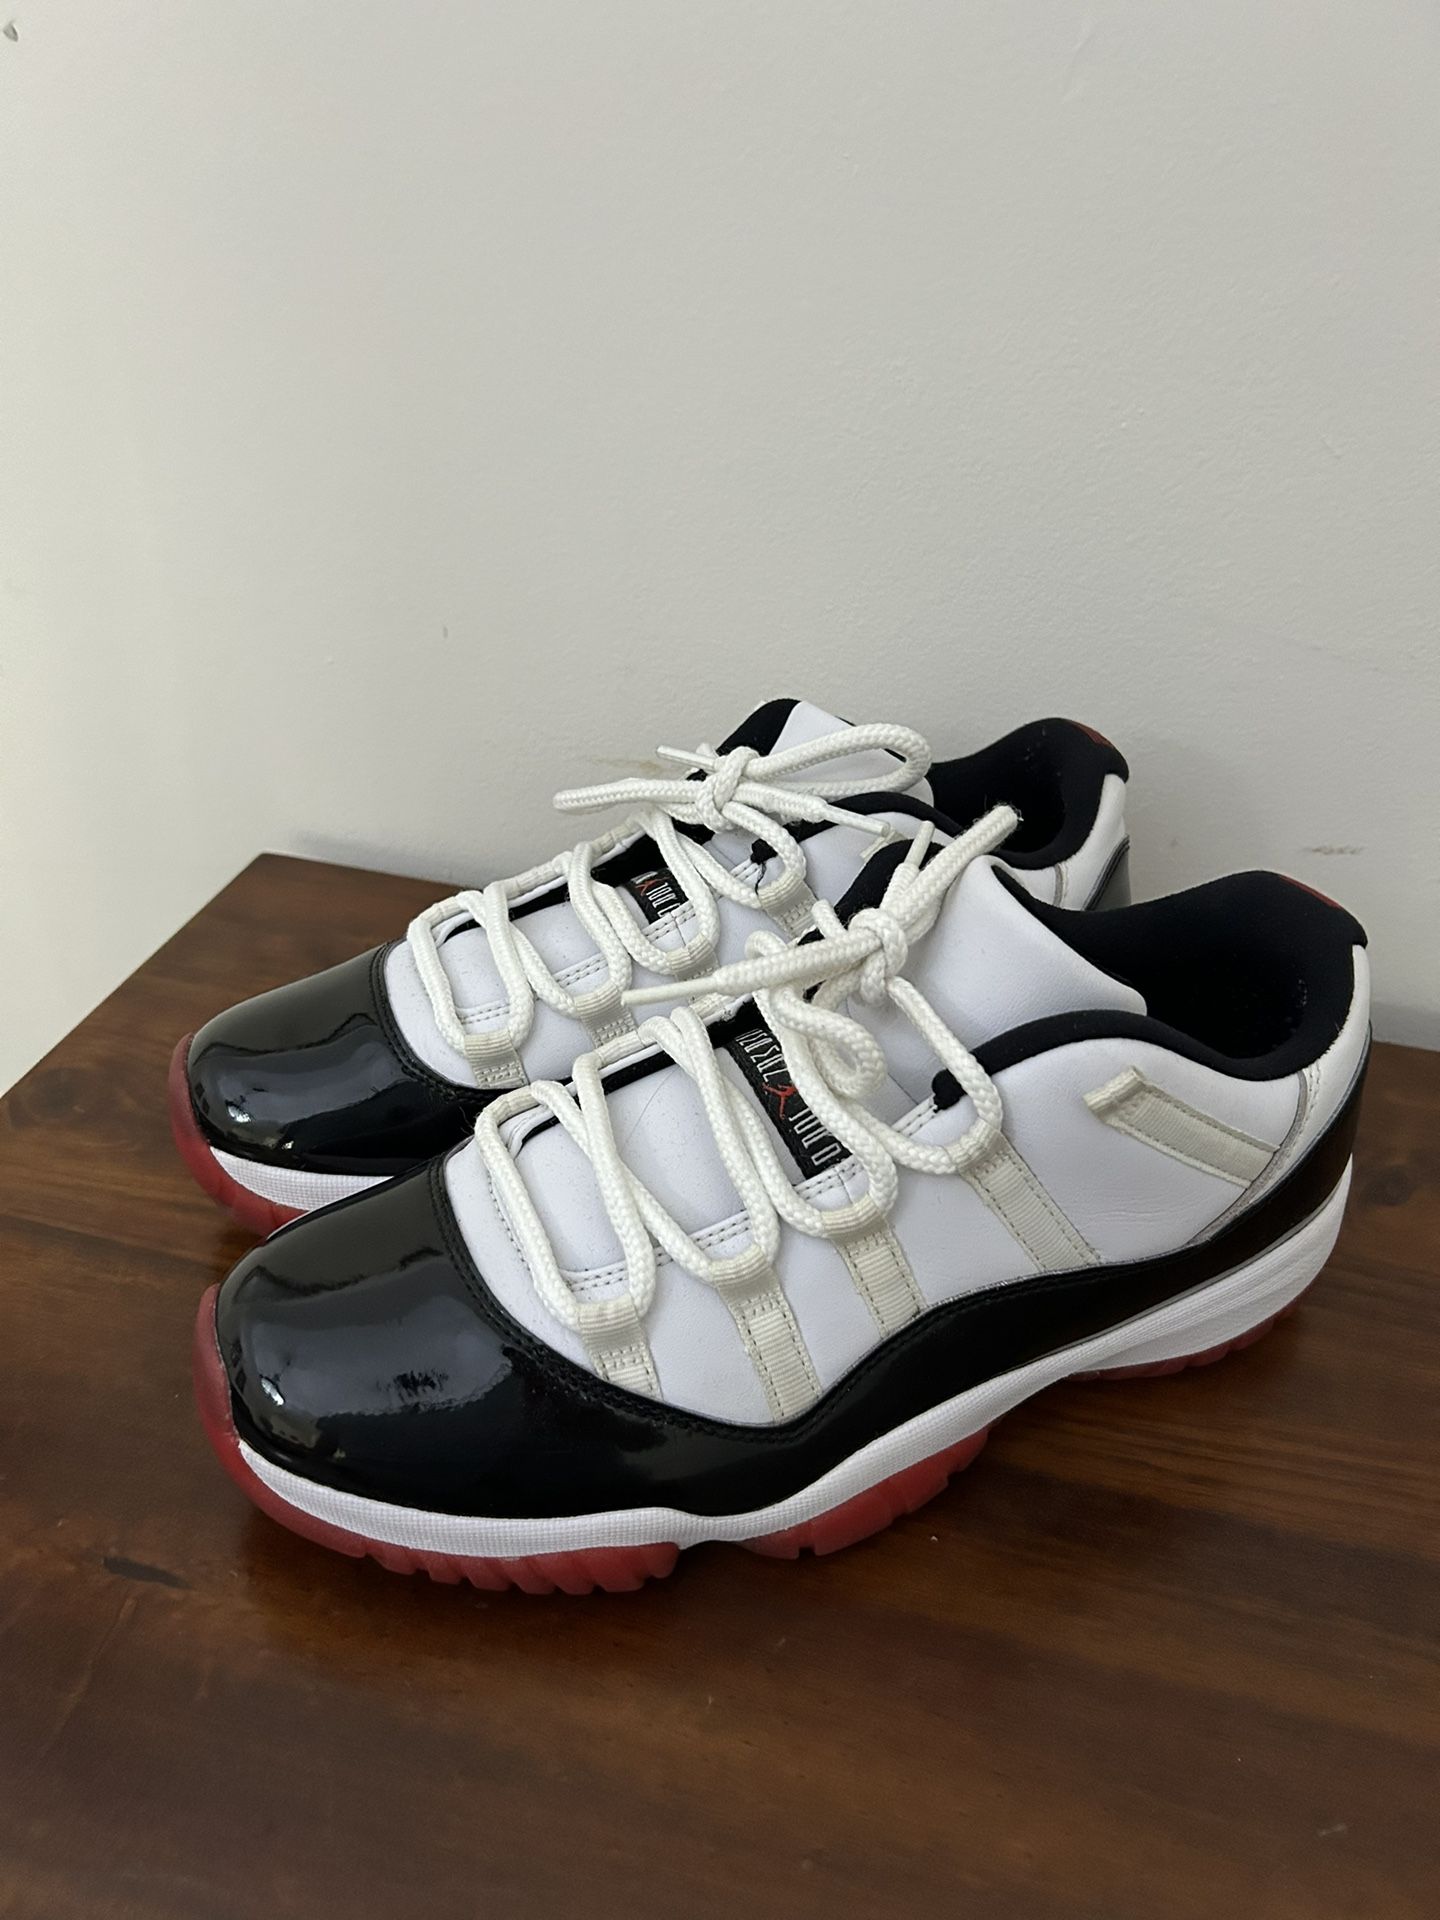 Jordan 11 Low Concord Bred. Negotiable. Open for trades